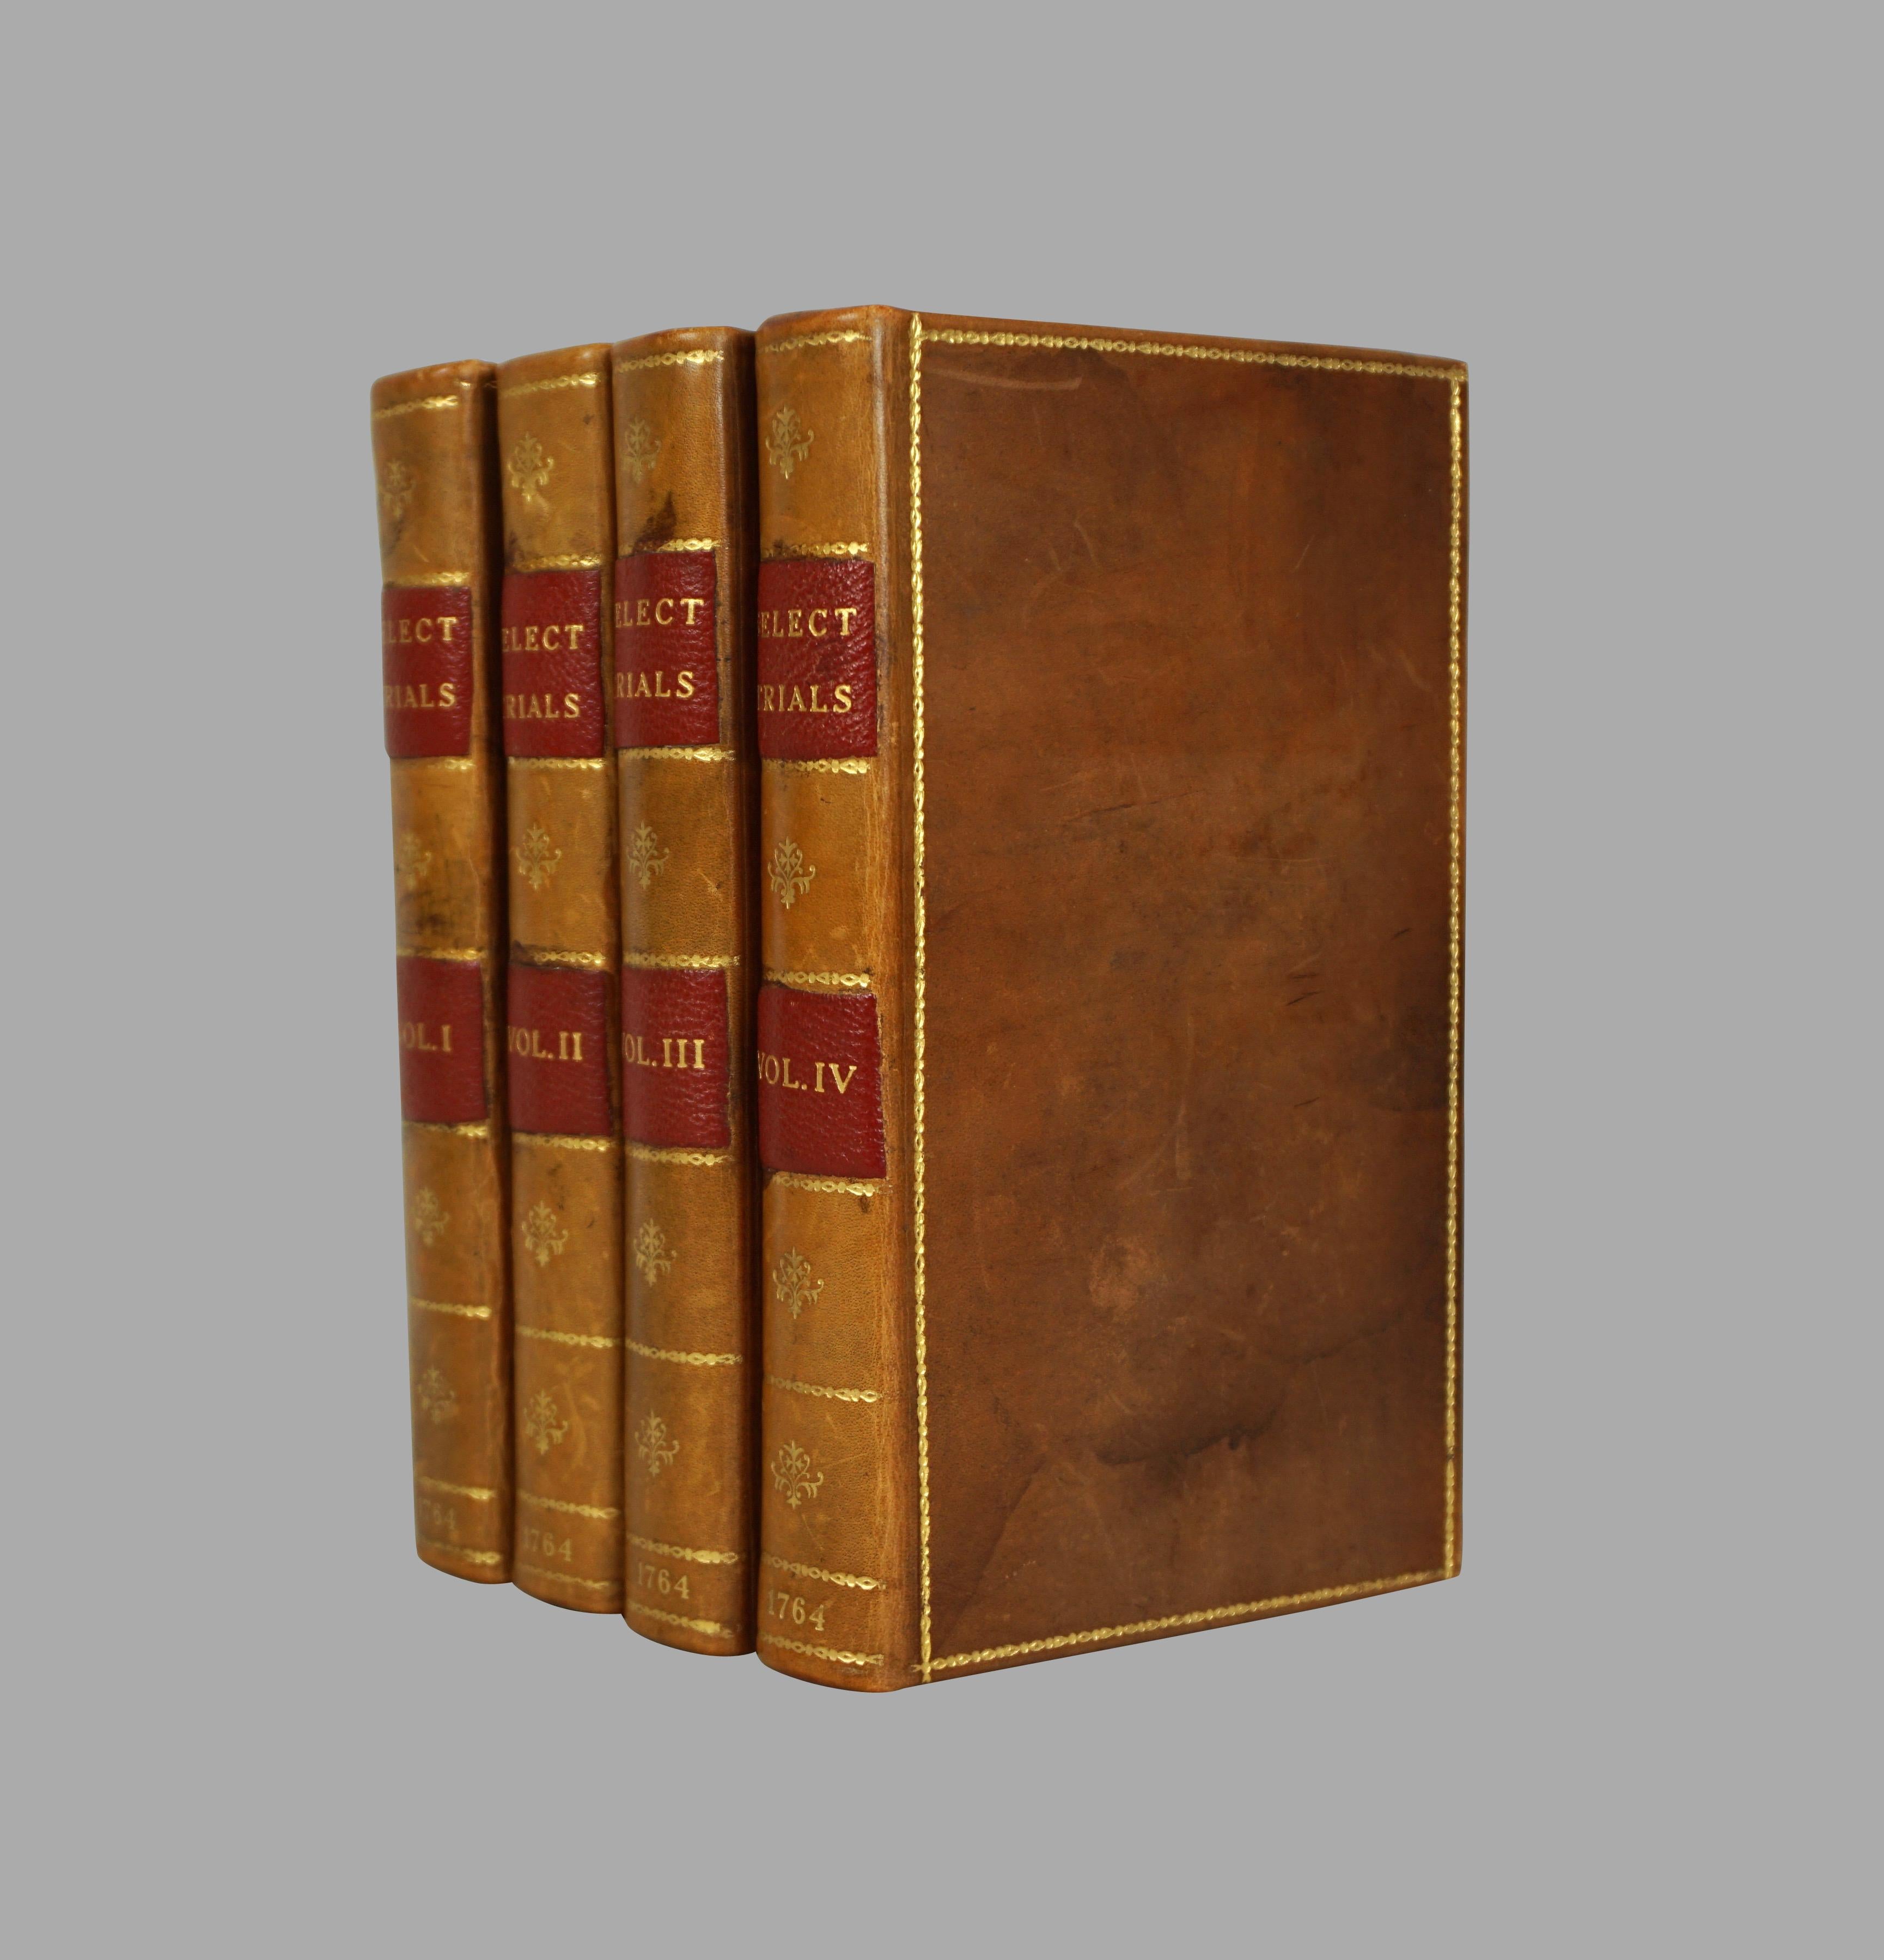 A set of 4 mid 18th century leather bound small volumes recording the proceedings of criminal trials at Old Bailey, the London criminal courts, indexed by specific crimes. These accounts were published to amuse and inform the English people of that